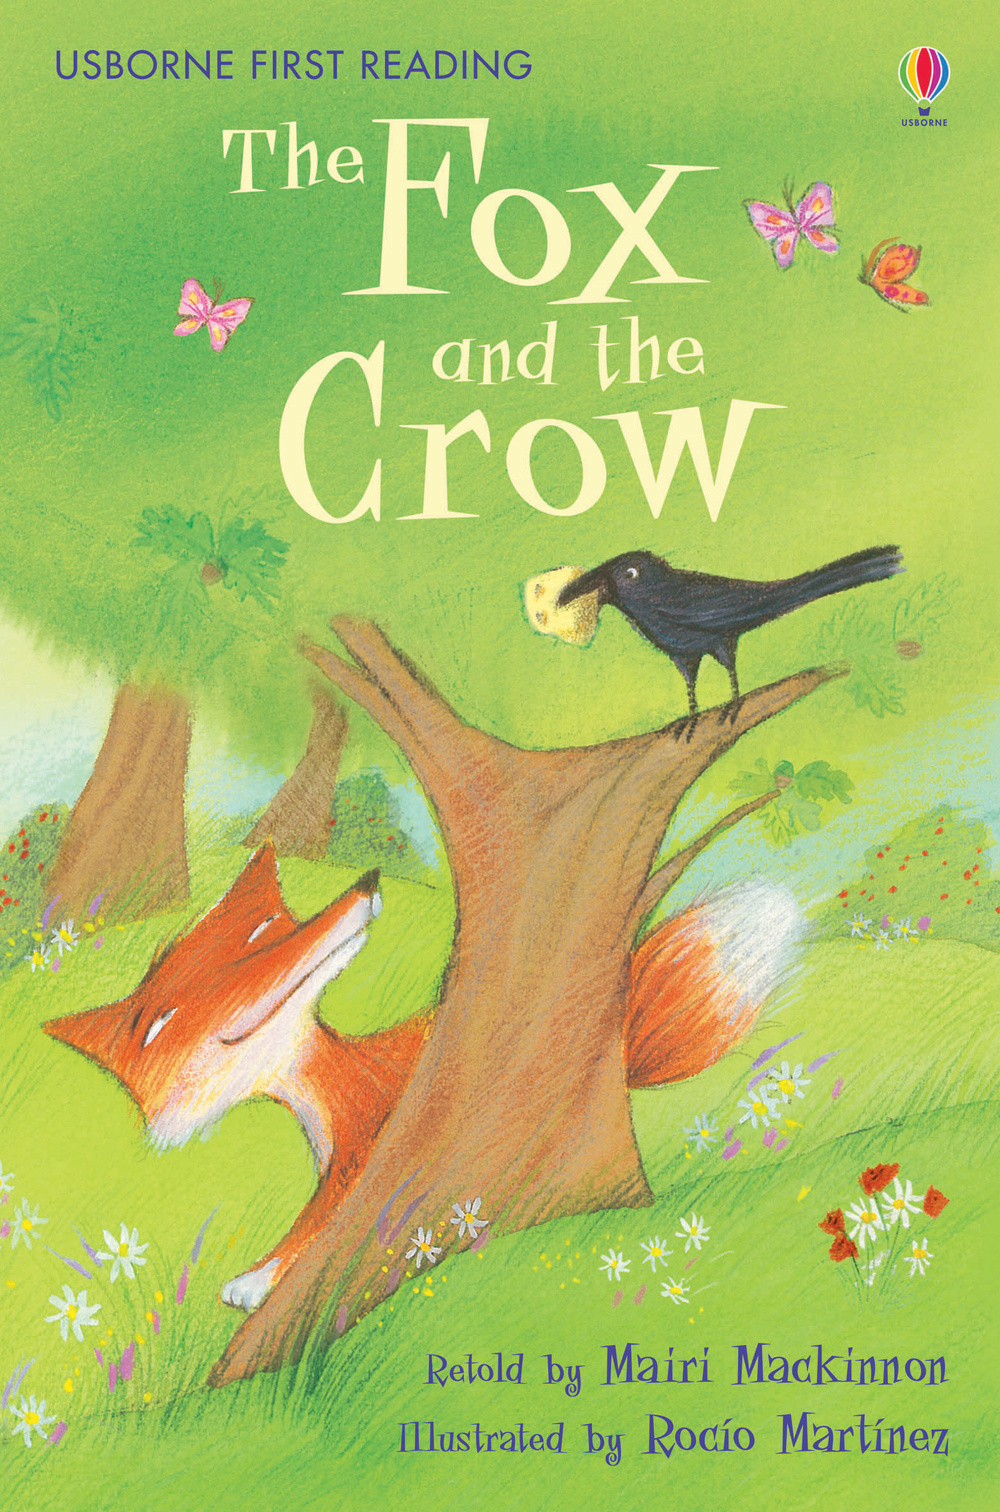 The fox and the crow